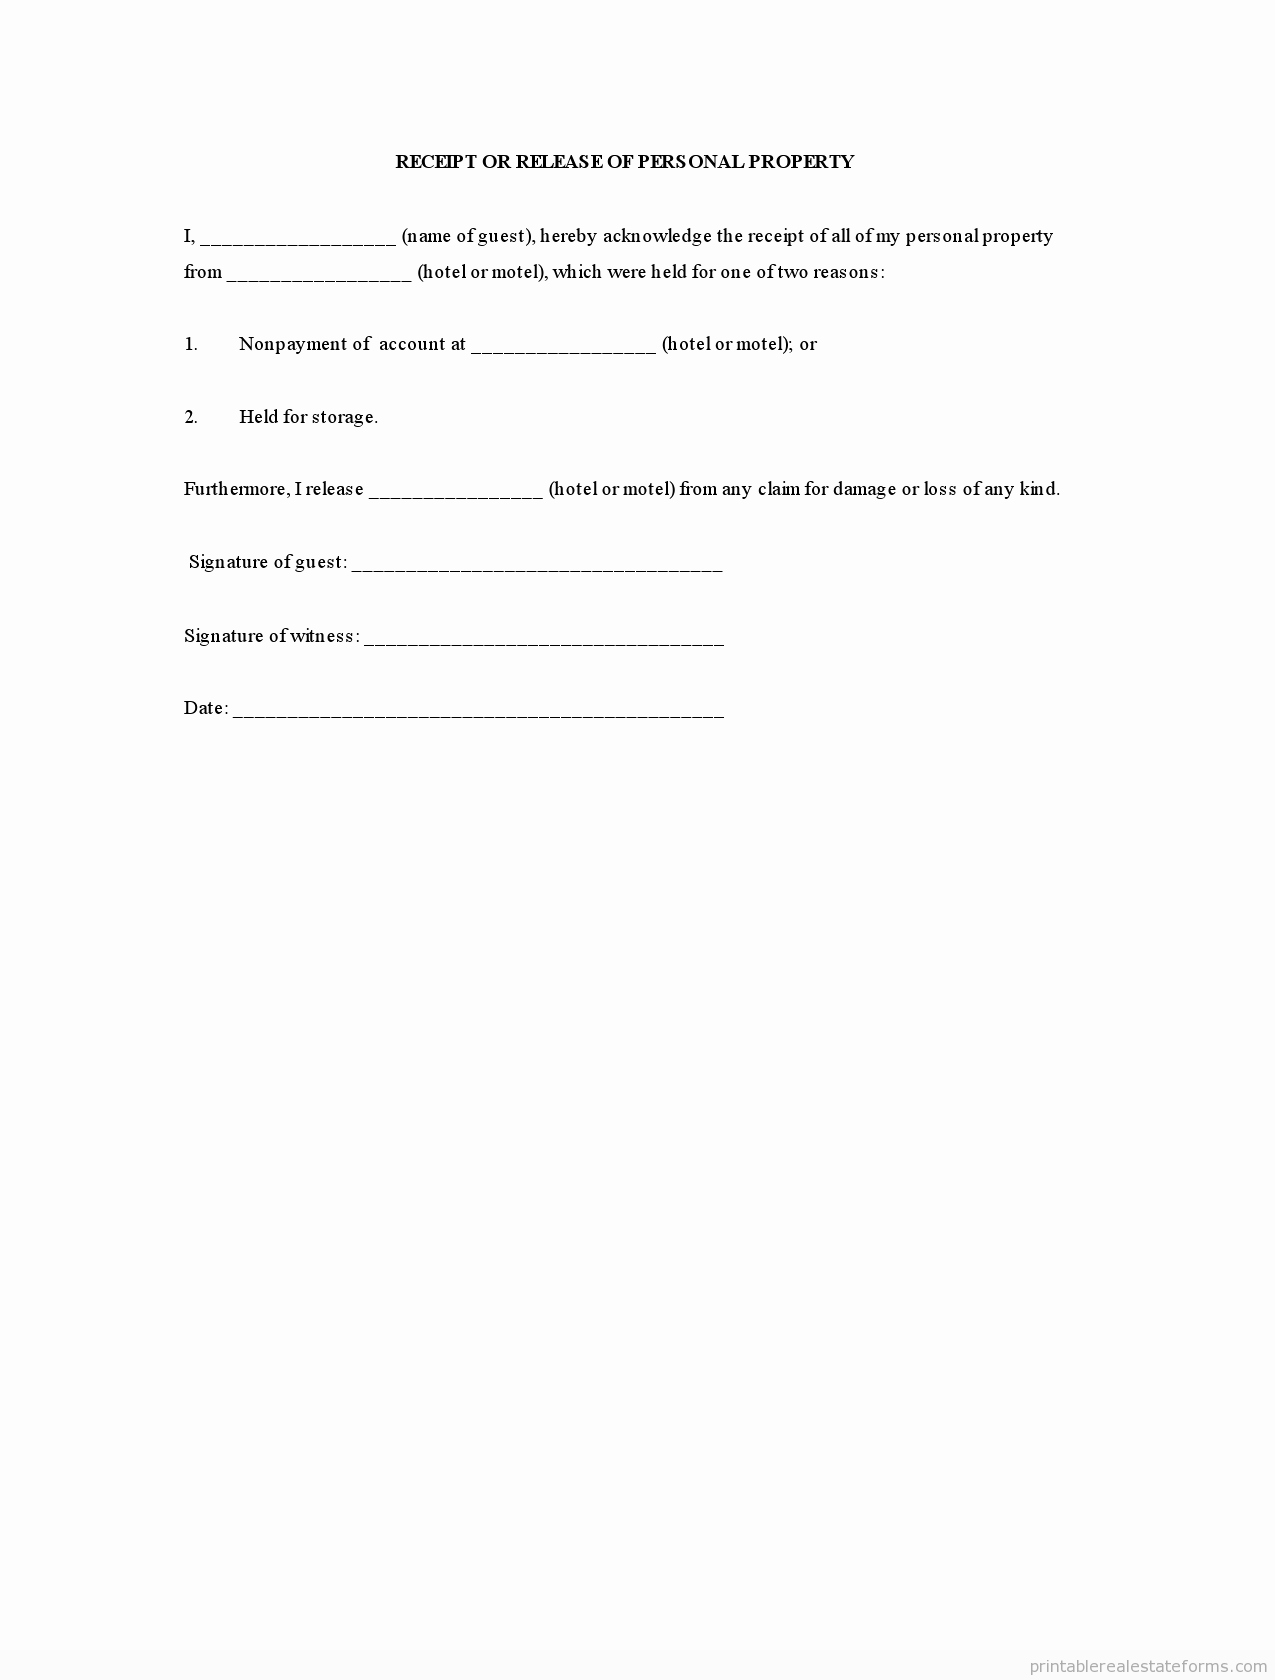 Personal Property Release form Template Luxury Free Personal Property Release form Sample Letter Pdf